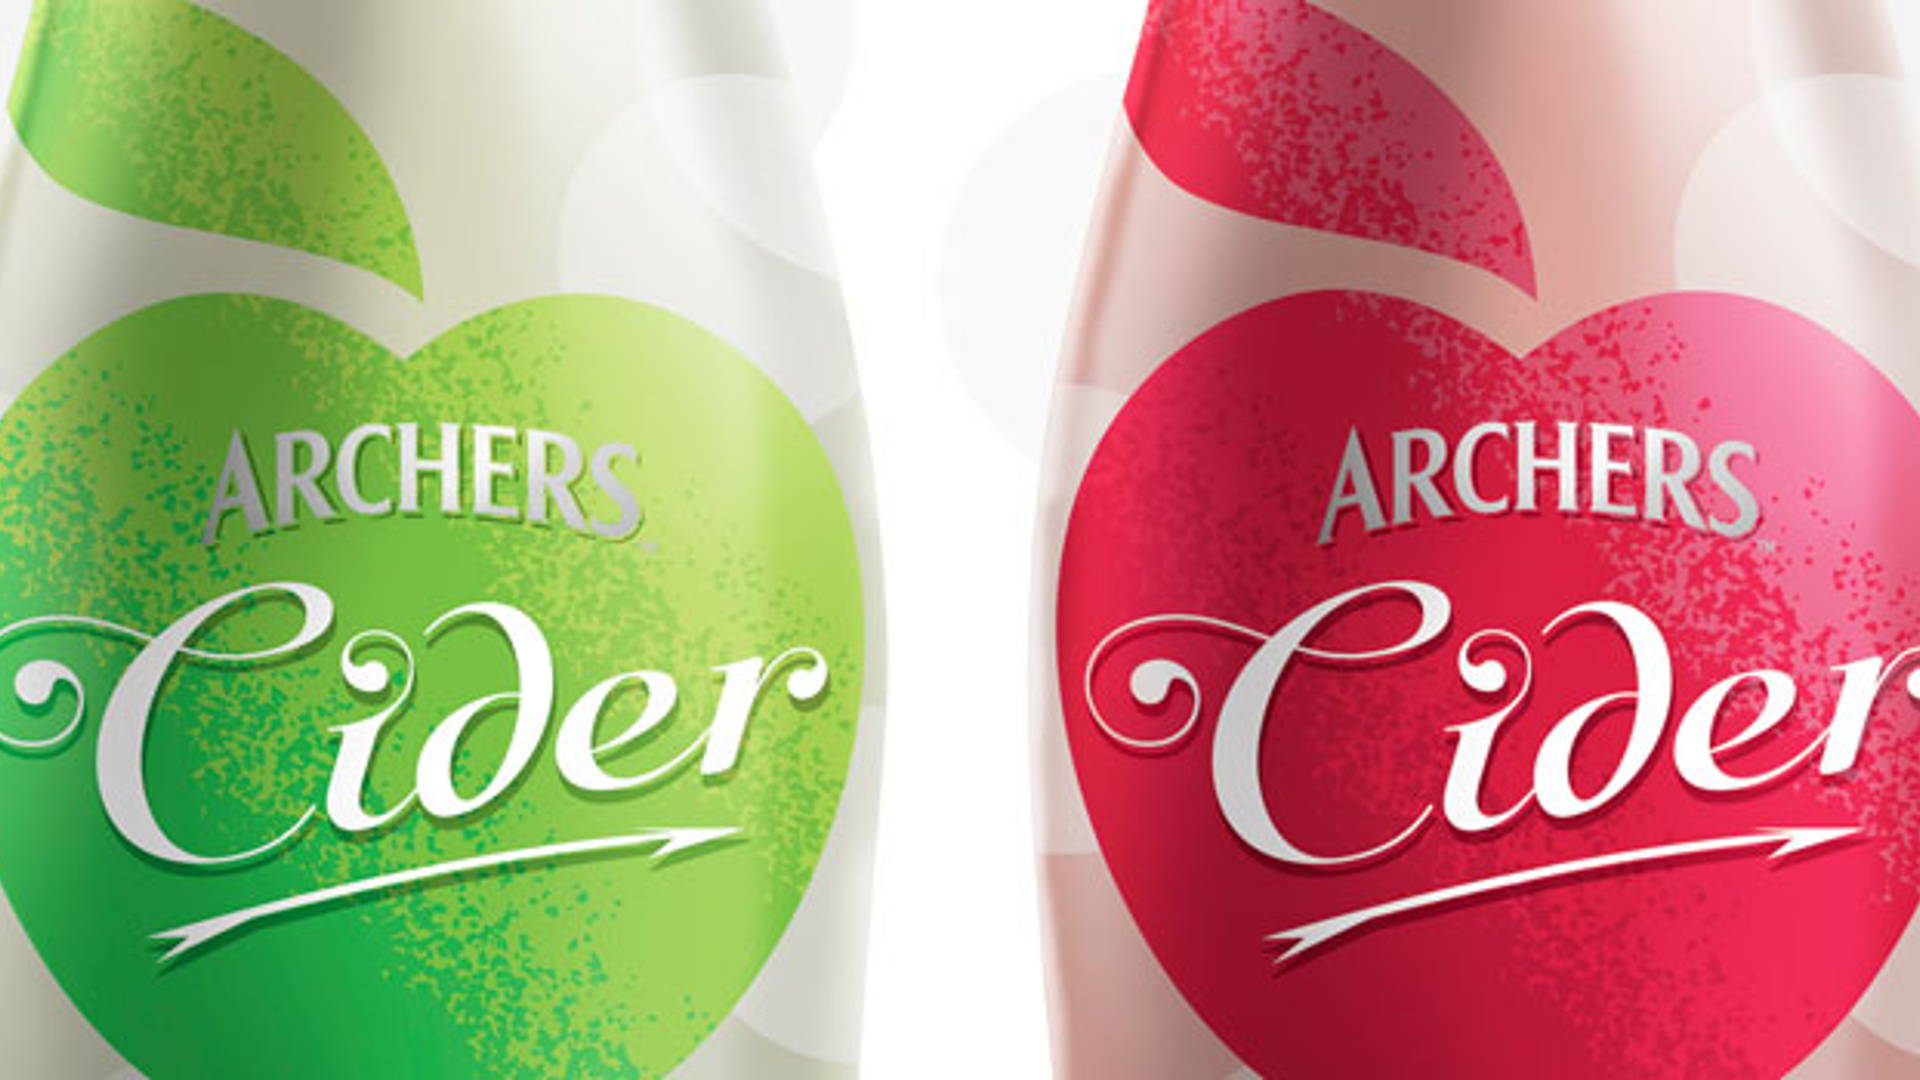 Featured image for Archers Cider